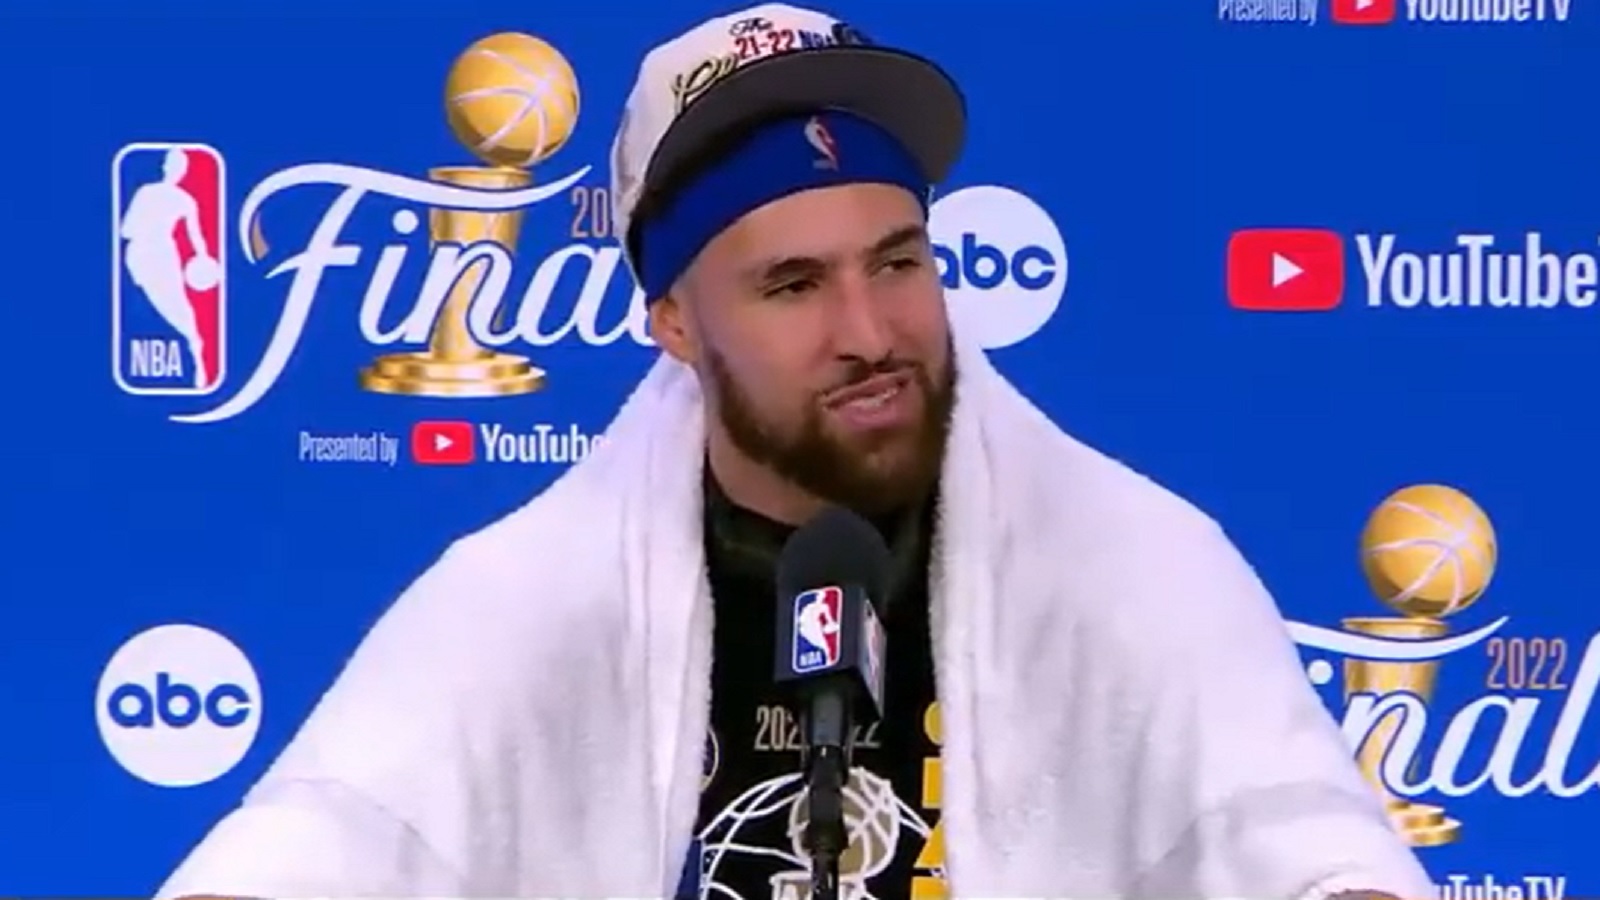 Klay Thompson takes big shot at 'bum' Grizzlies player after winning title